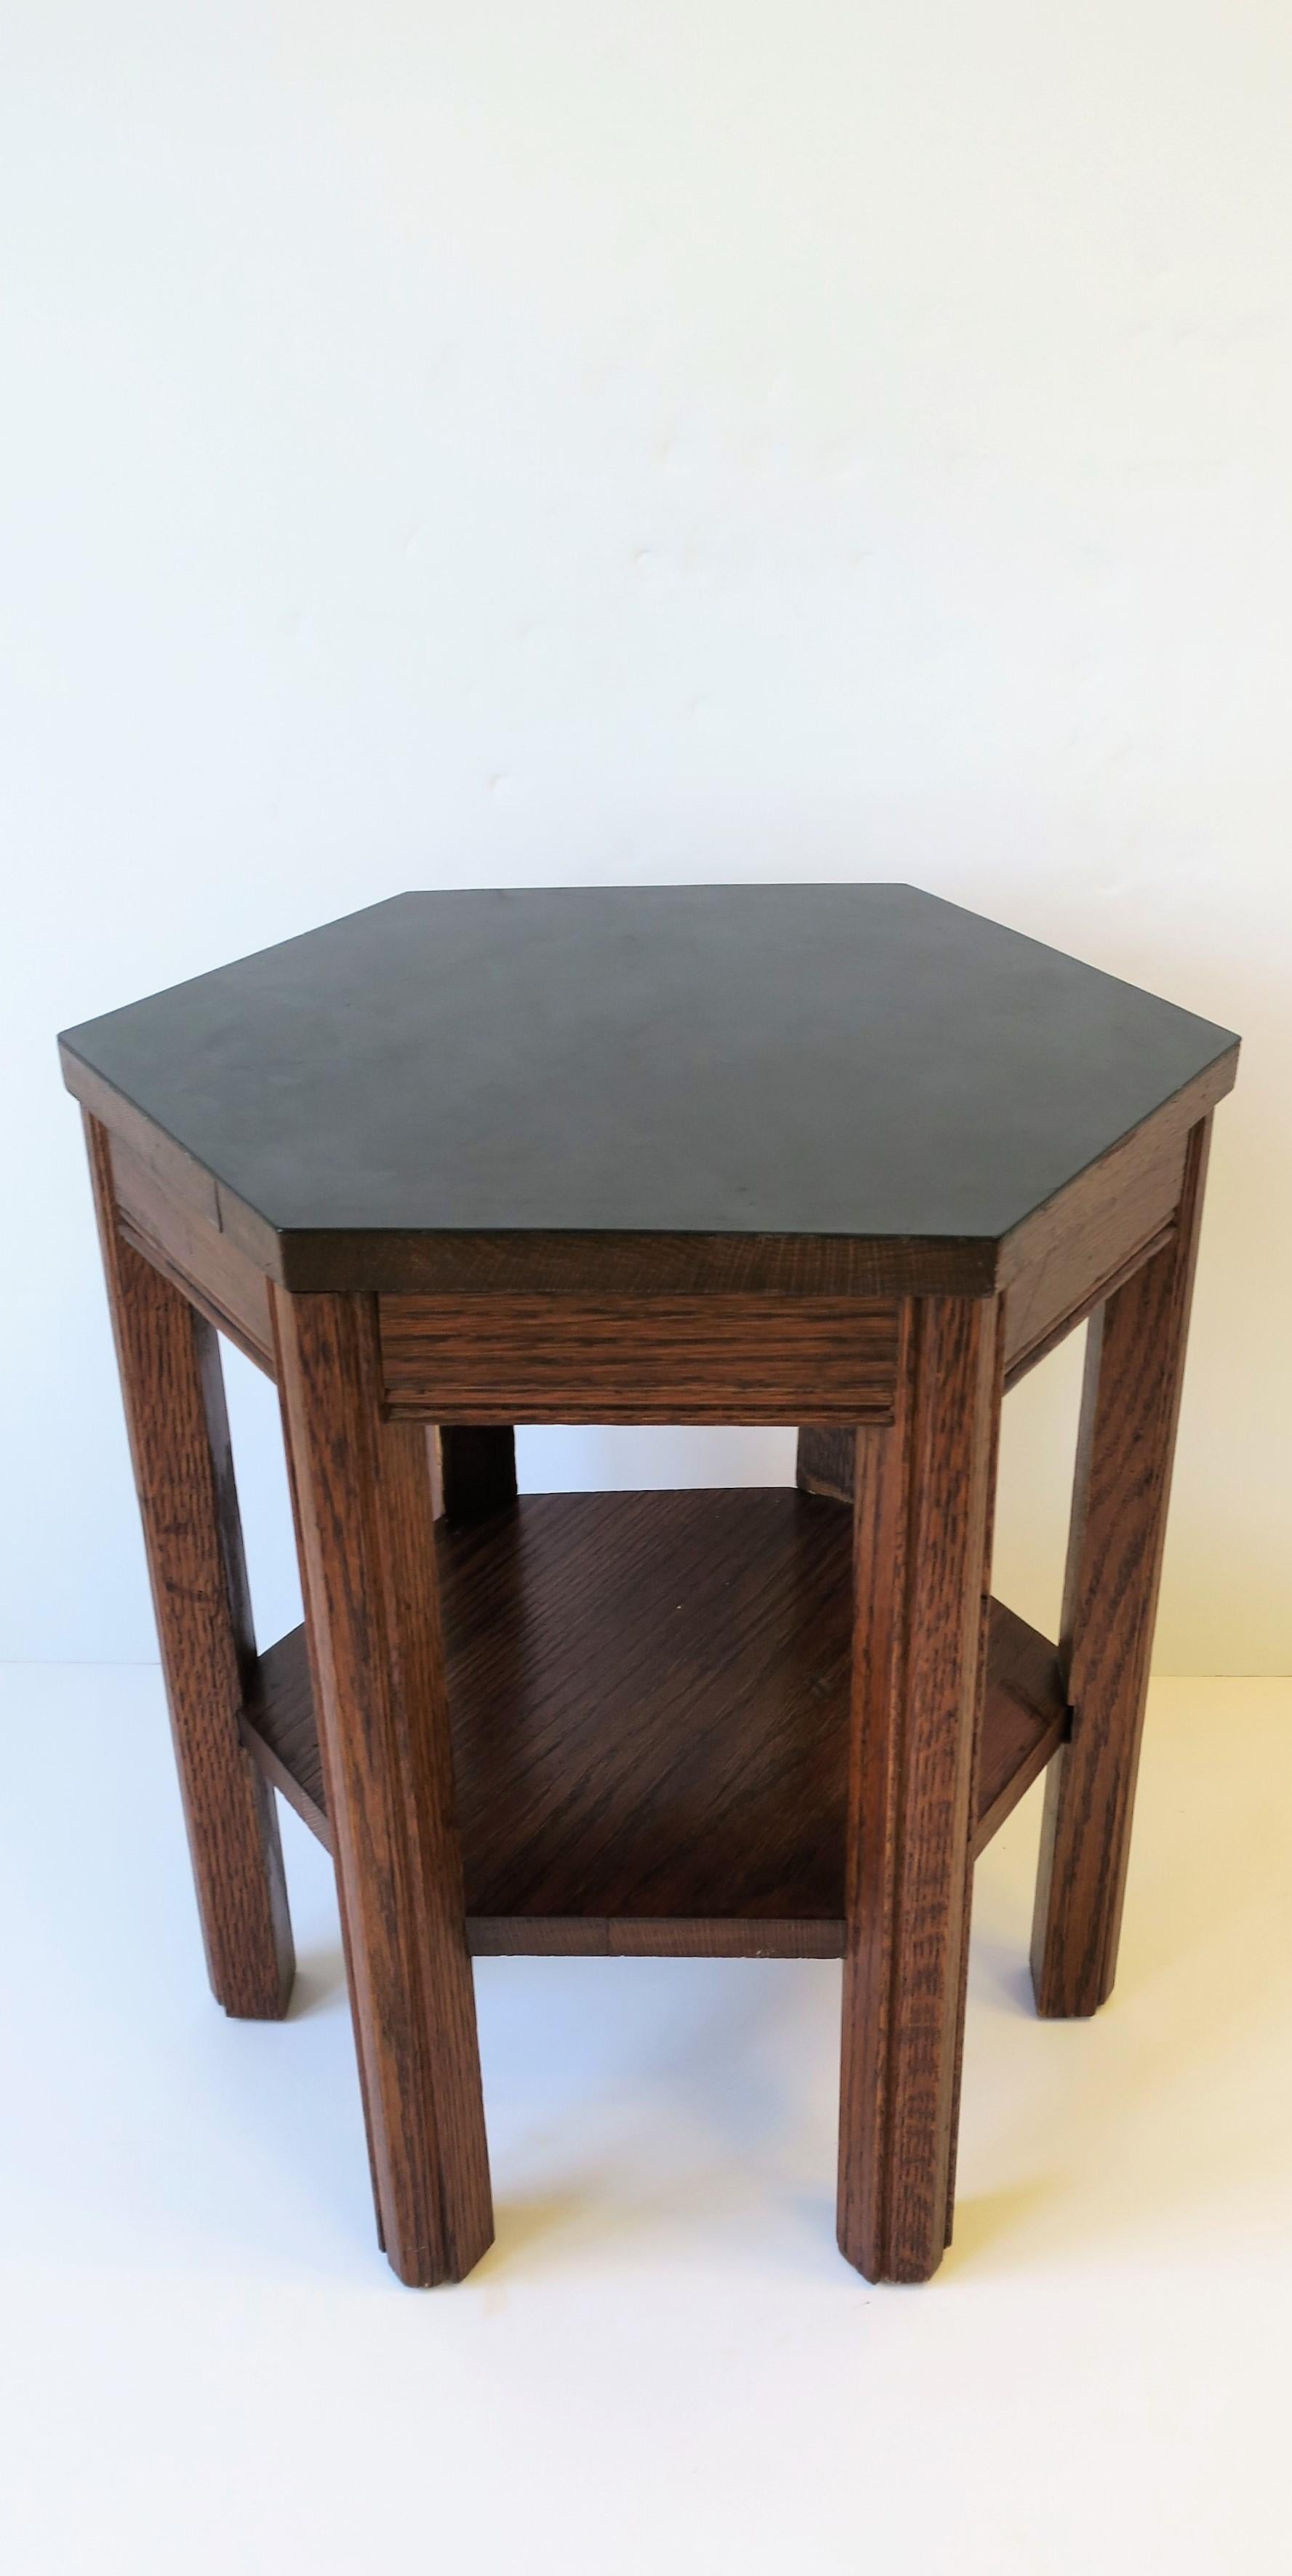 A small midcentury octagonal shaped side or drinks table with black veneer top and lower shelf. 

Table measures: 17 in. W x 15 in. D x 18 in. H.